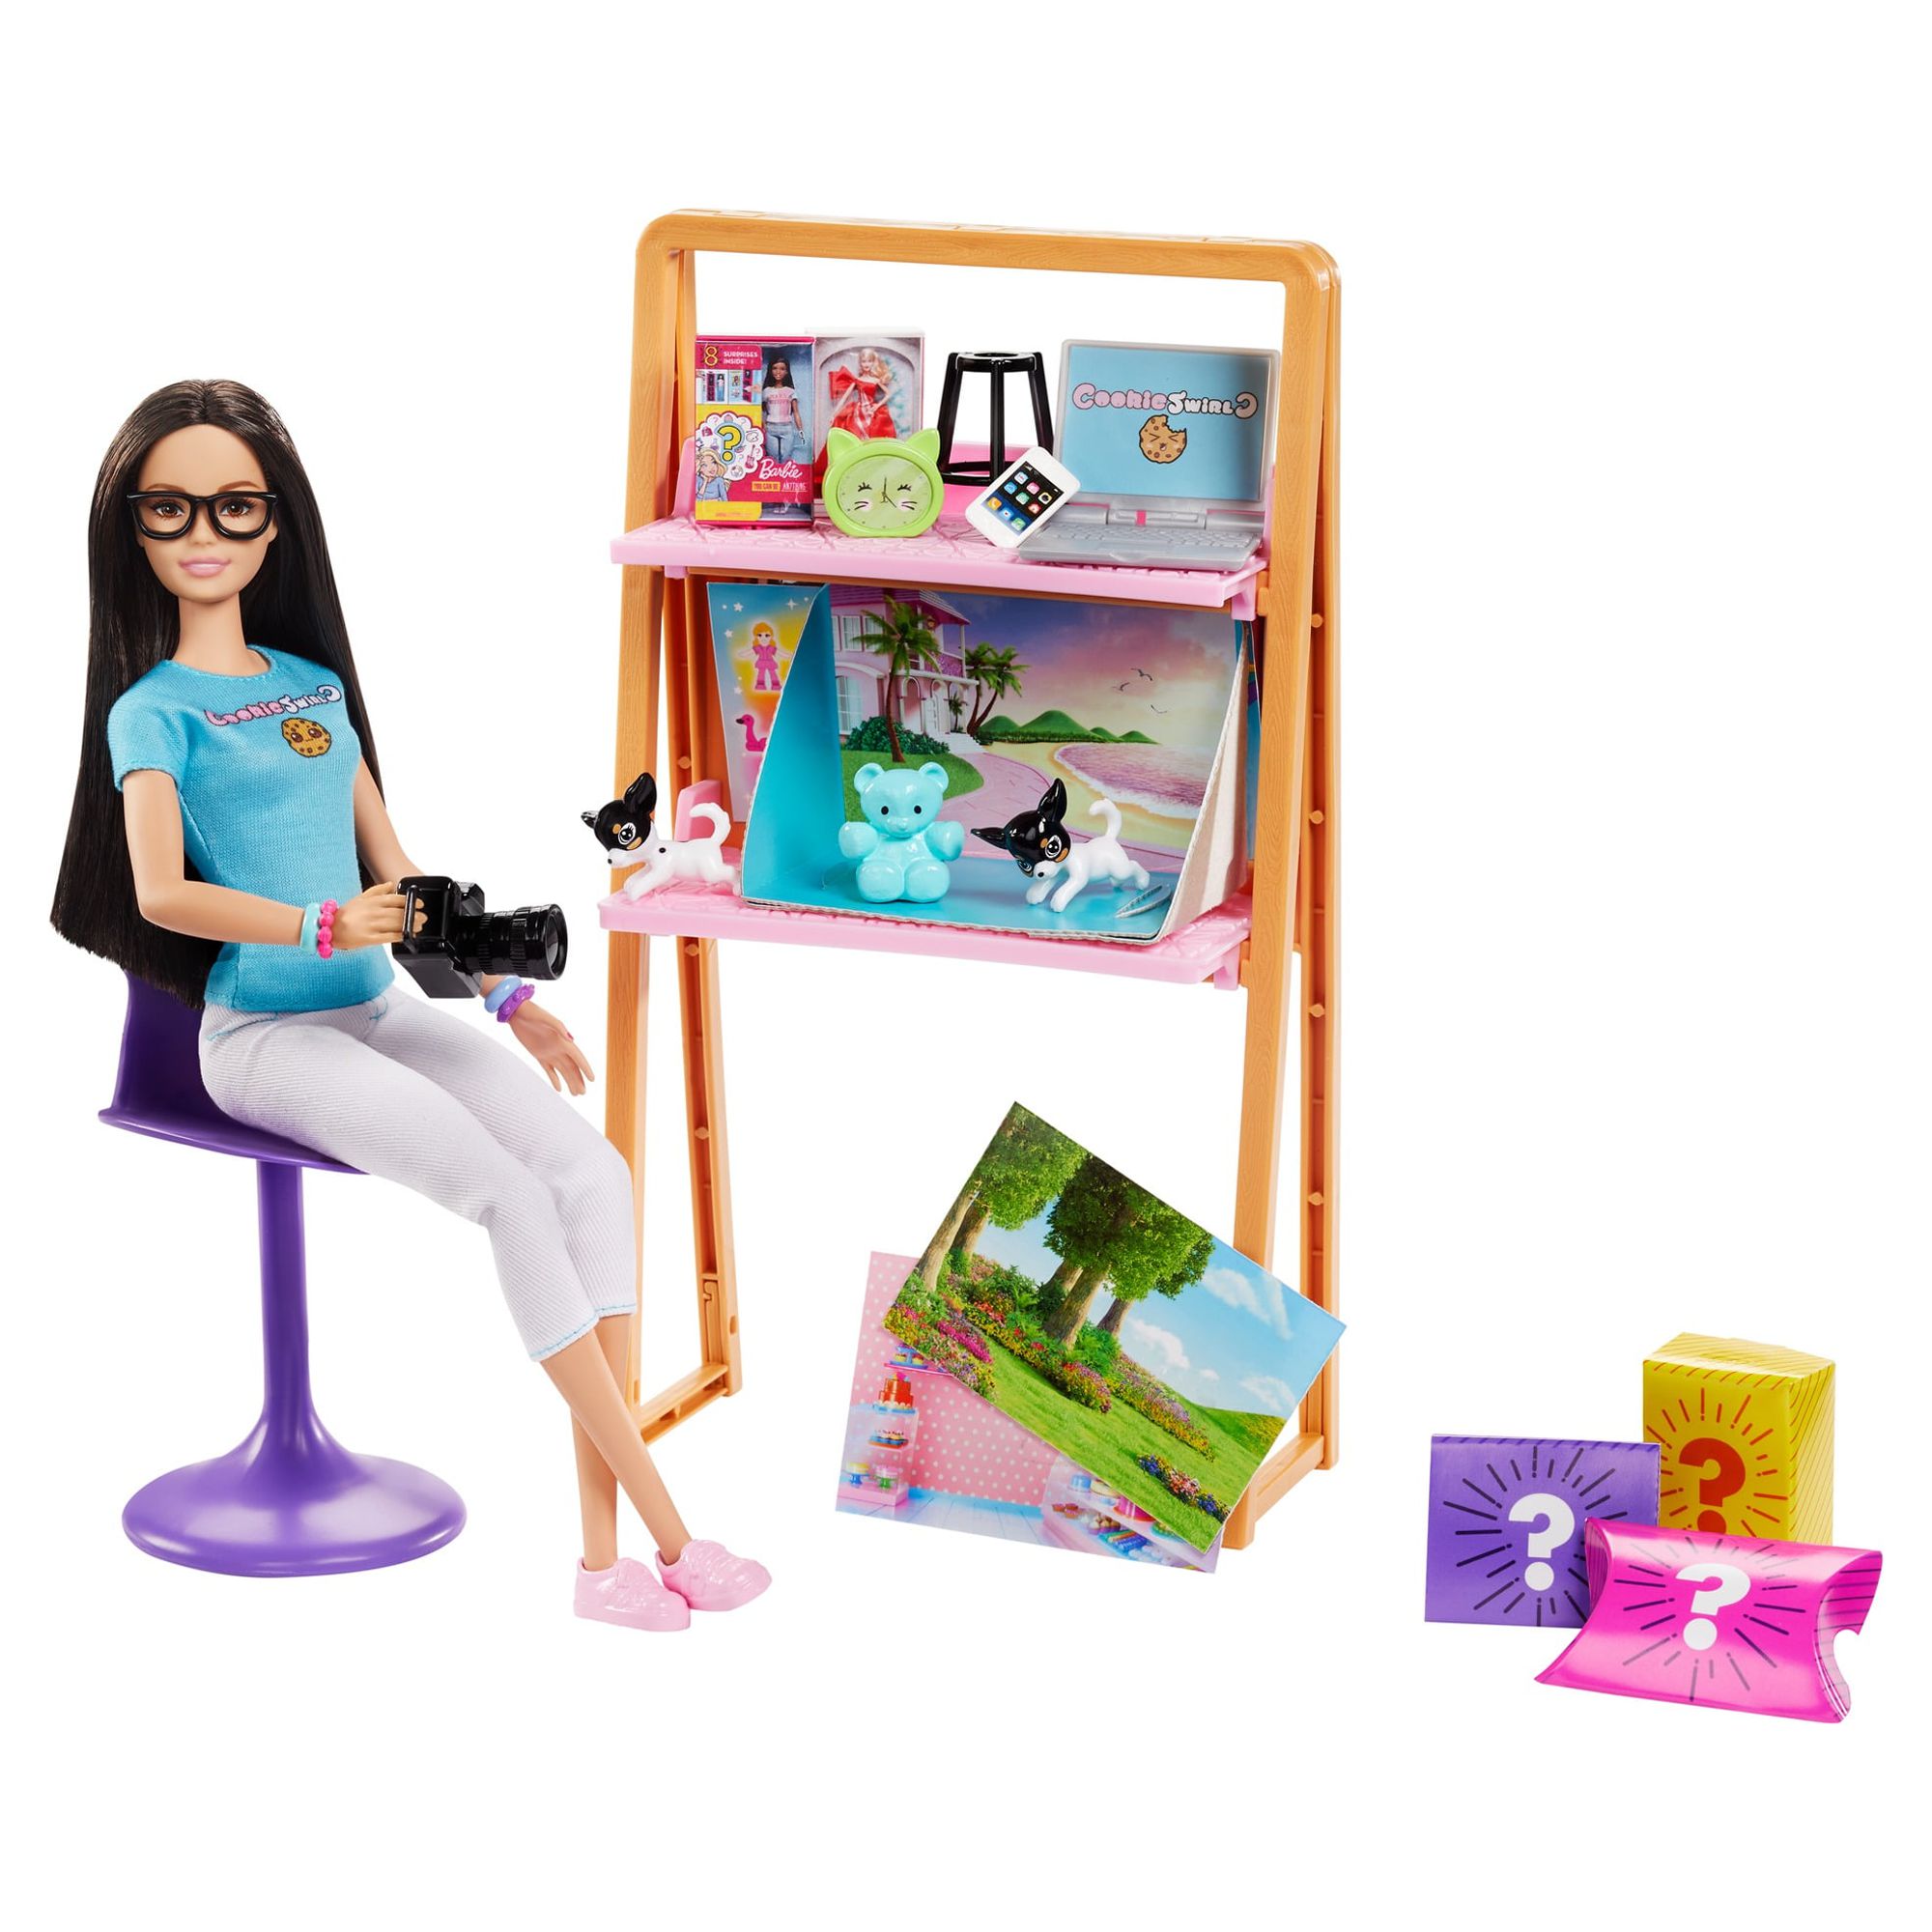 Barbie CookieSwirlC Doll and Accessories - image 1 of 6